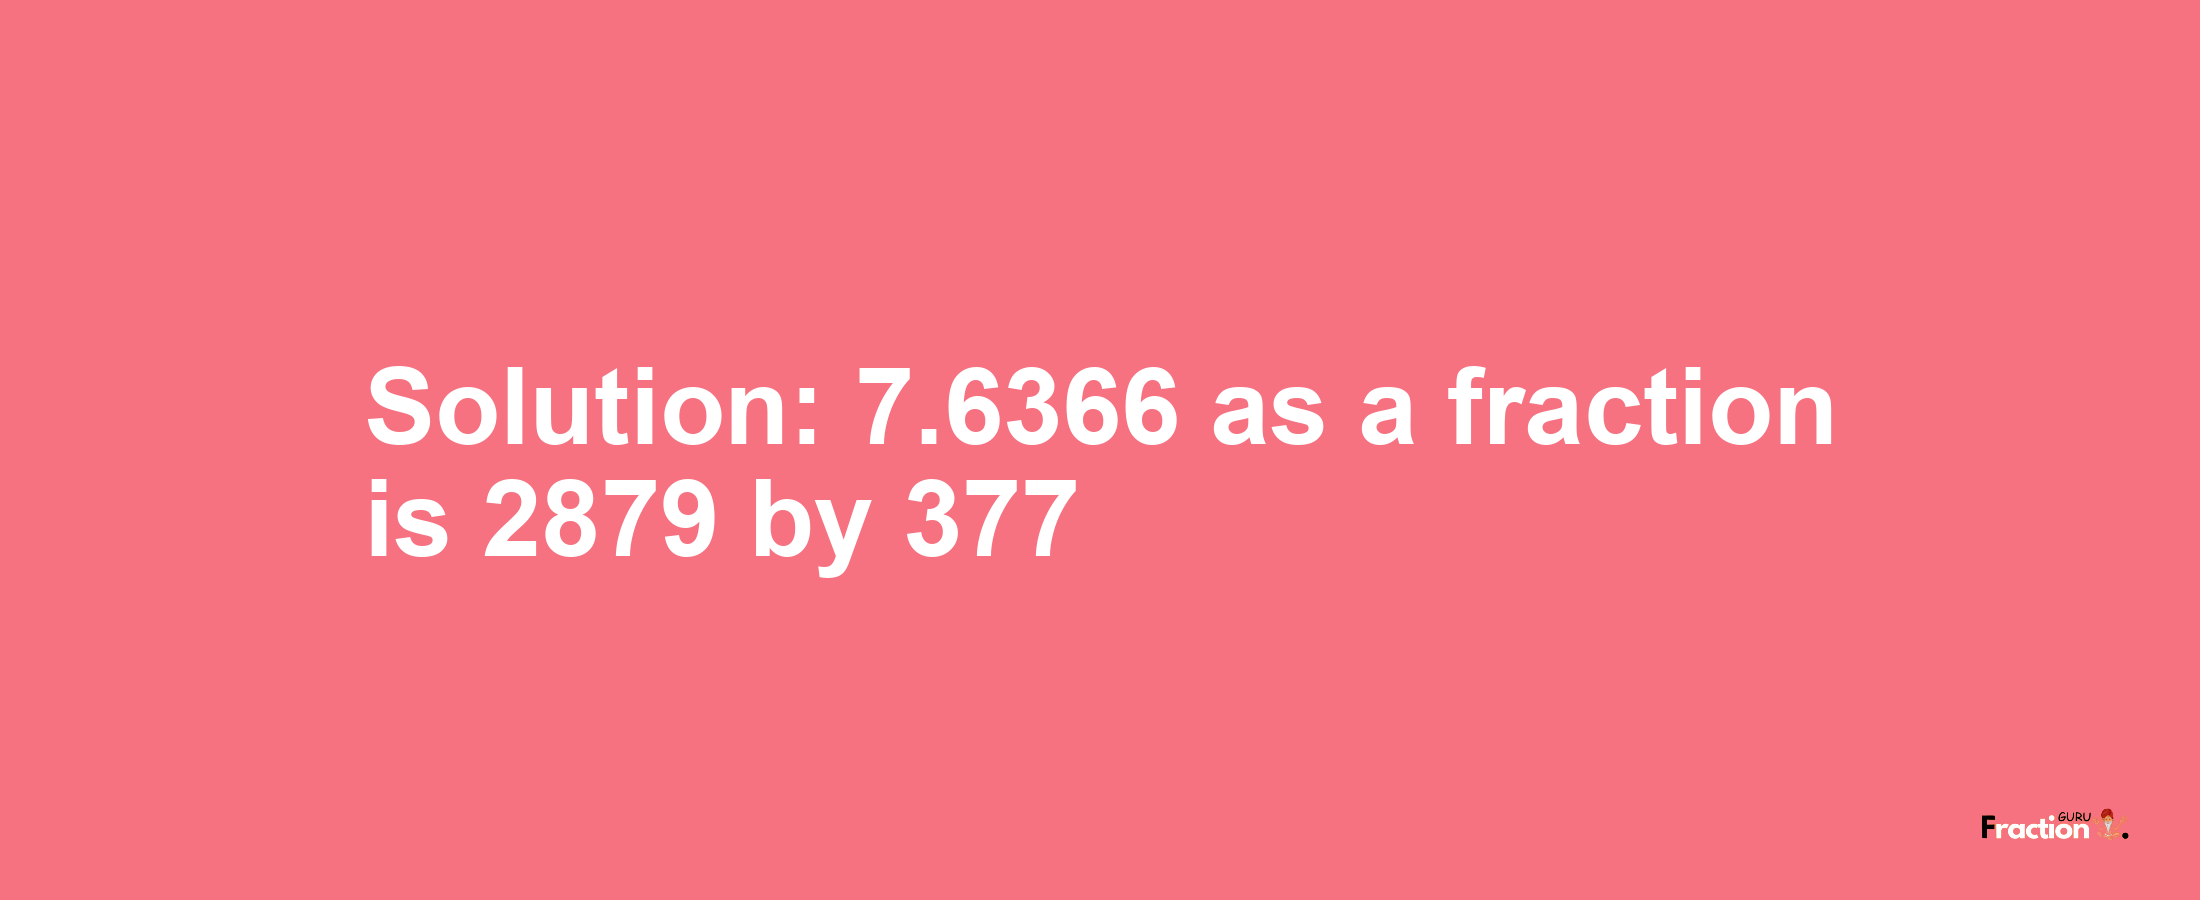 Solution:7.6366 as a fraction is 2879/377